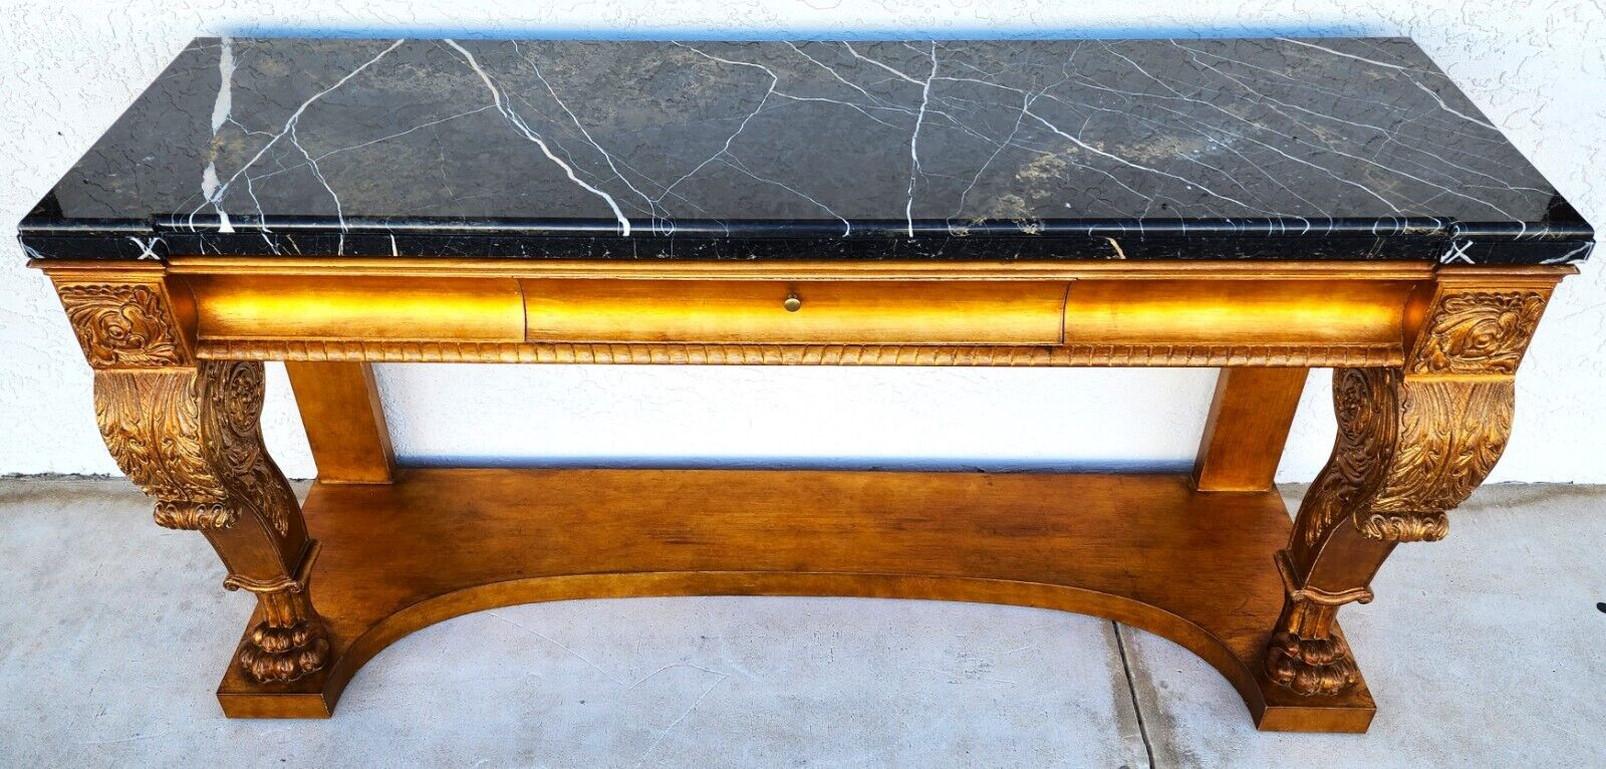 For FULL item description click on CONTINUE READING at the bottom of this page.
 

Offering One Of Our Recent Palm Beach Estate Fine Furniture Acquisitions Of A
Henredon Italian Neoclassical Style Marble & Giltwood Console Table 
Spectacular